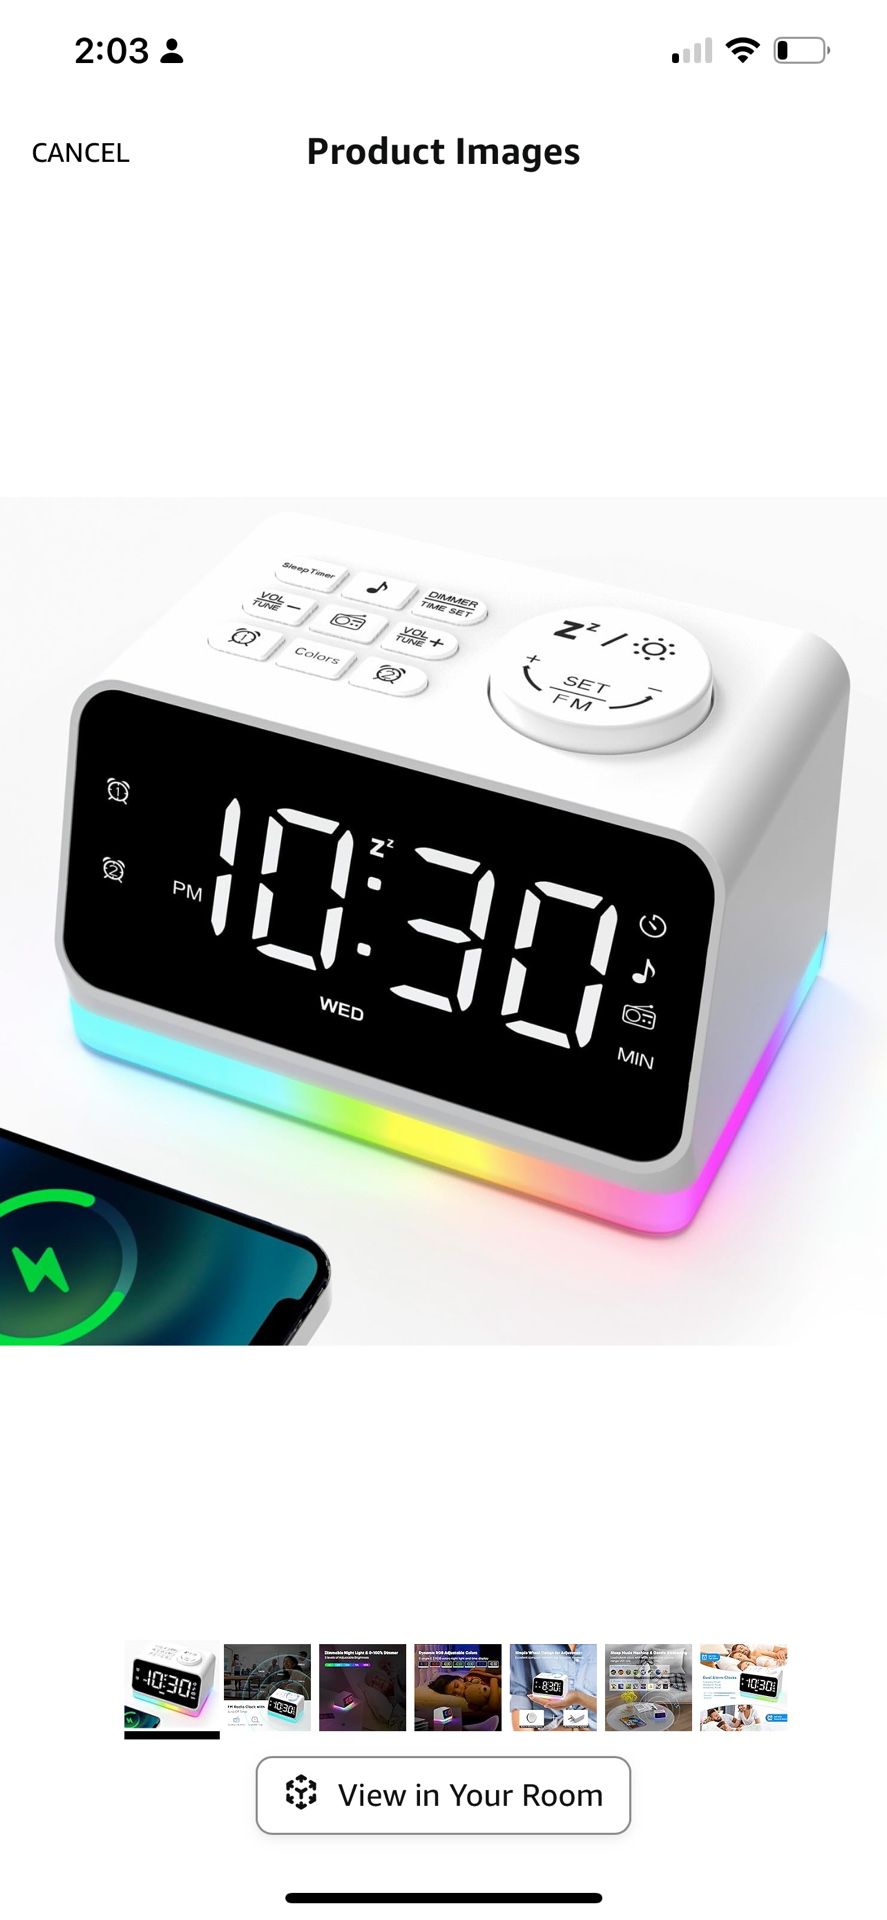 Alarm Clock for Bedroom with Radio, Glow Small Digital Clock Radio with 8 Color Night Light & Display, USB Ports, Dimmer, Timer, Sound Machine, Loud F